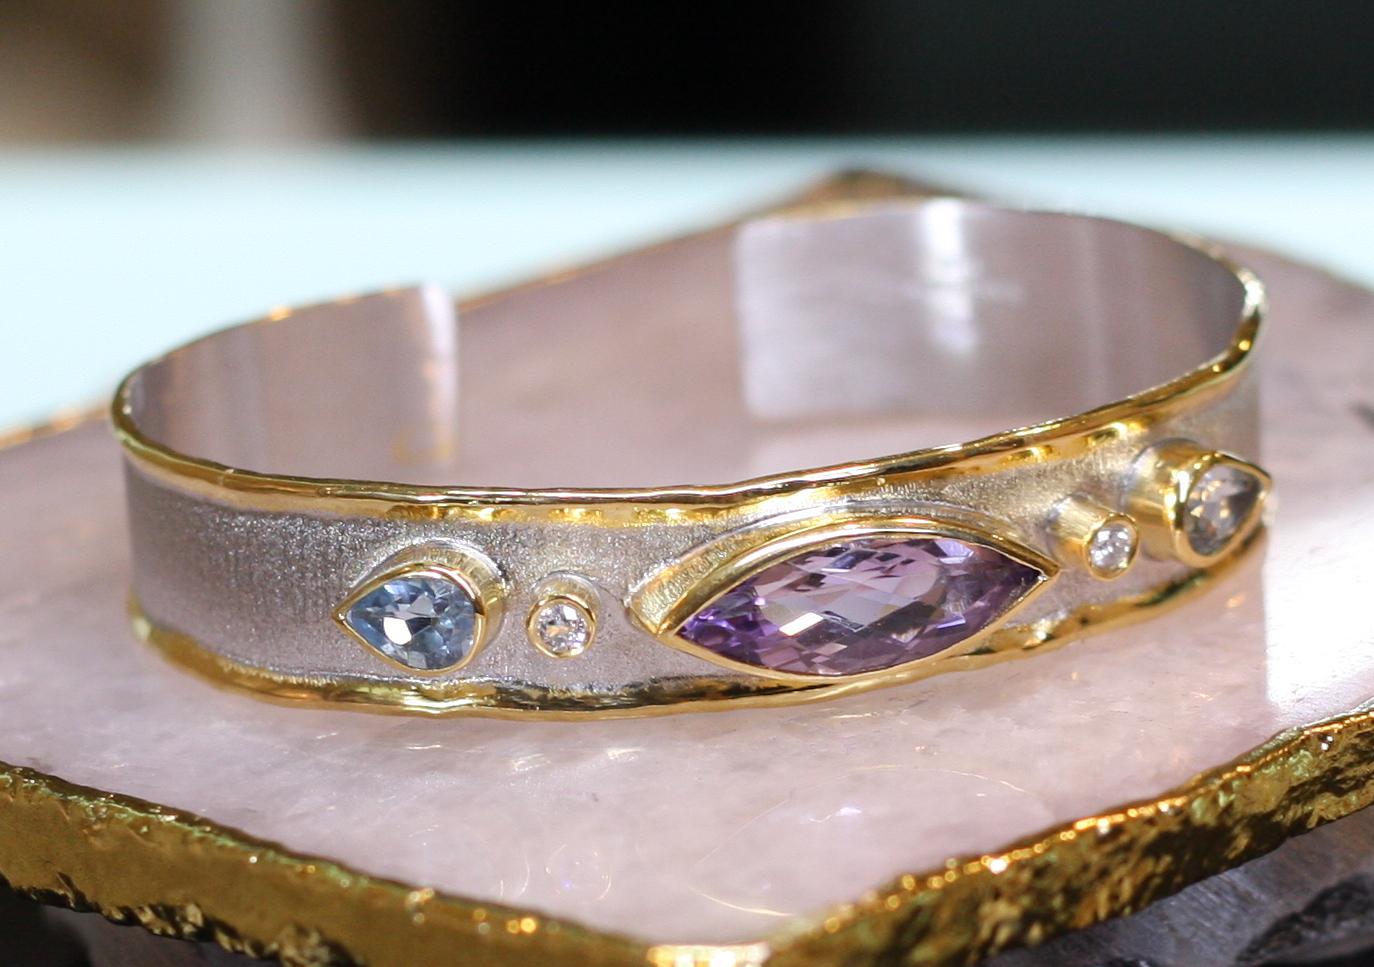 Yianni Creations all handmade in Greece from fine silver 950 purity and plated with palladium to resist the elements and all custom-made.  This gorgeous bracelet is a total weight of 5.70 Carat Amethyst in marquise shape, 2 Blue Topaz in pear shape